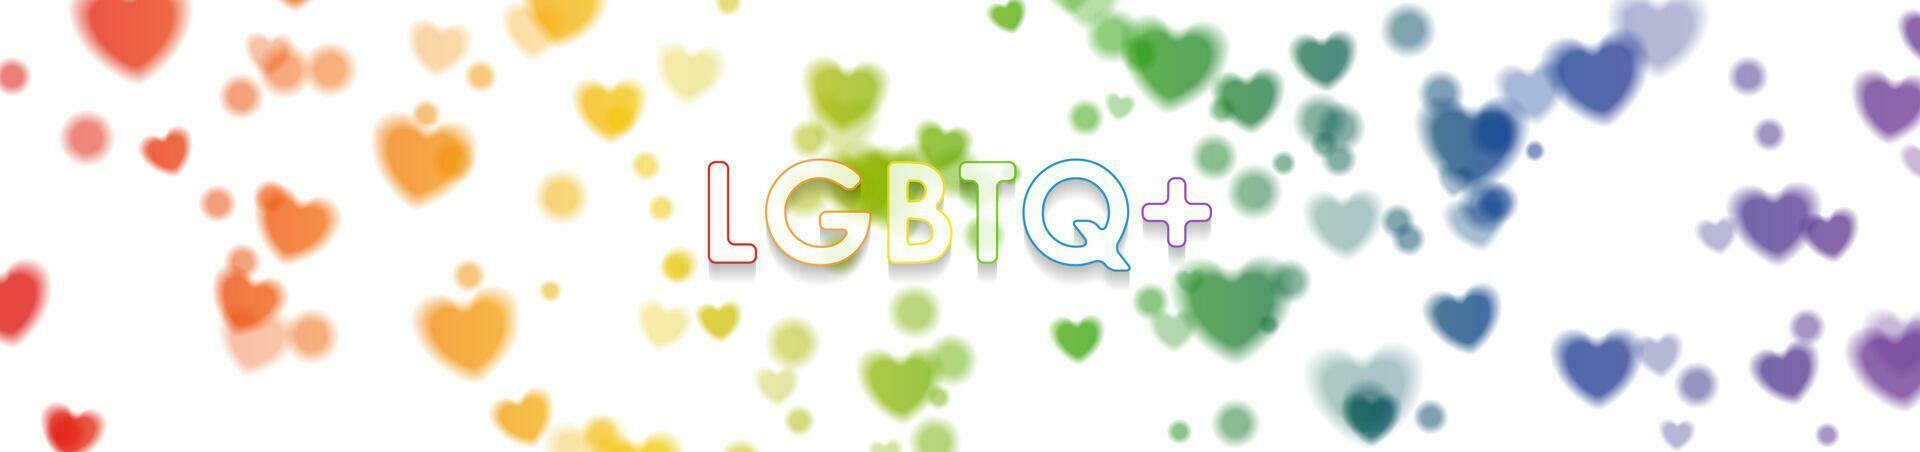 LGBTQ Pride Month abstract background with hearts vector